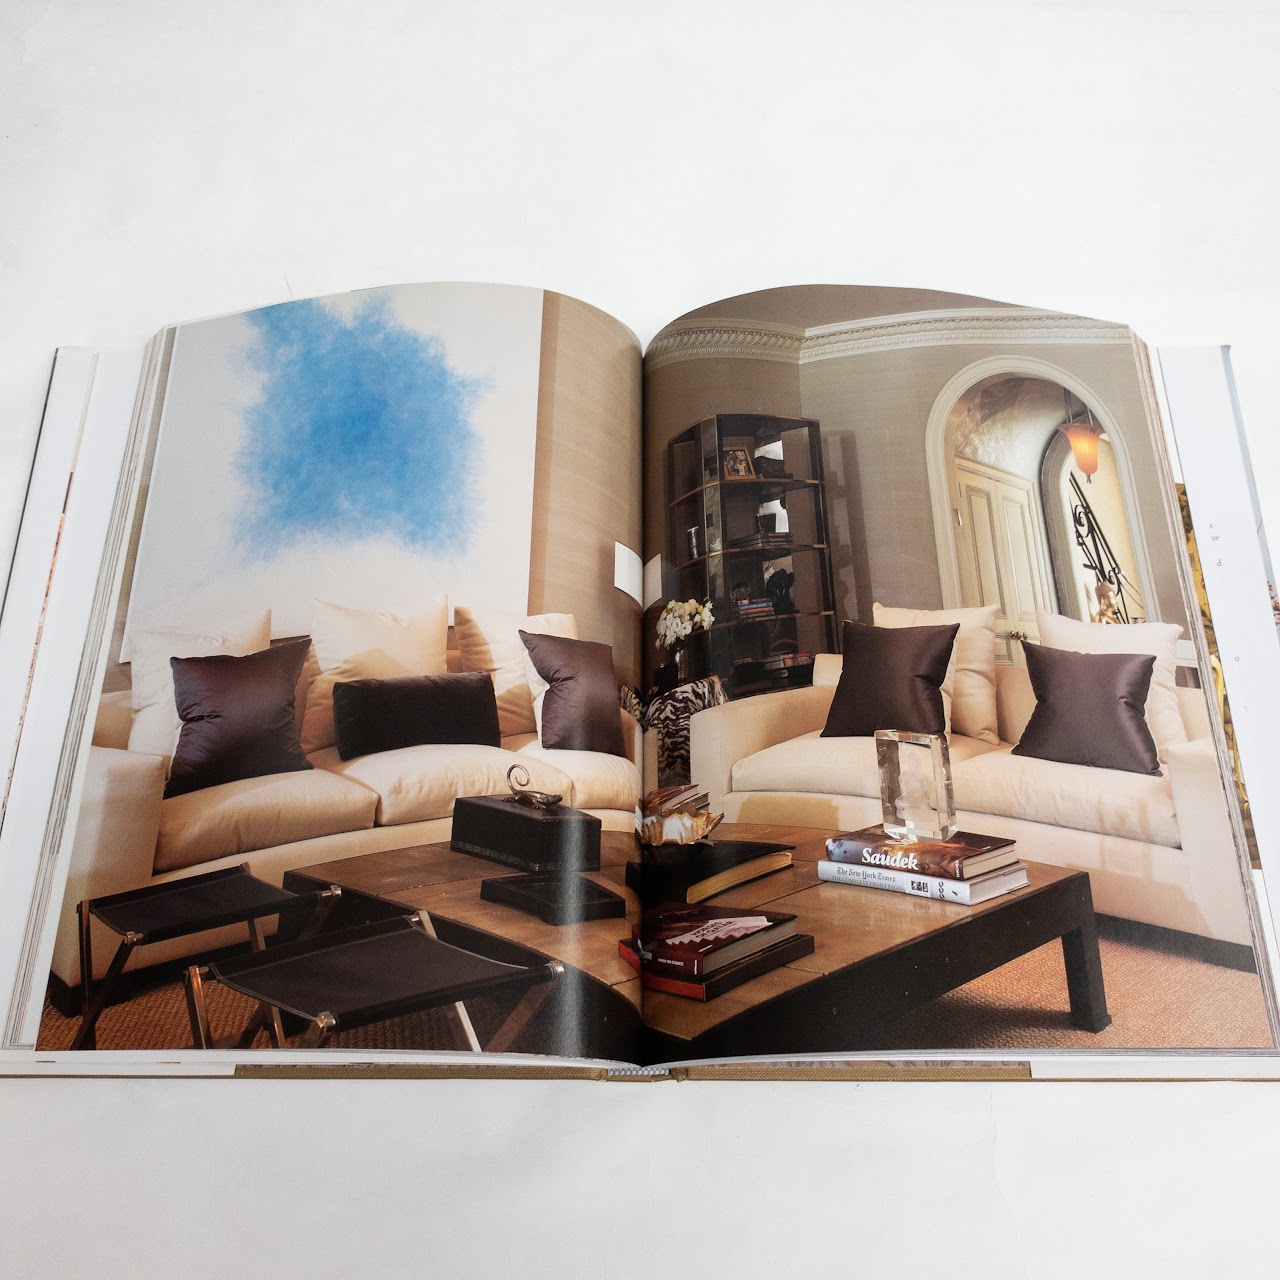 The Age of Elegance: Interiors by Alex Papachristidis Book